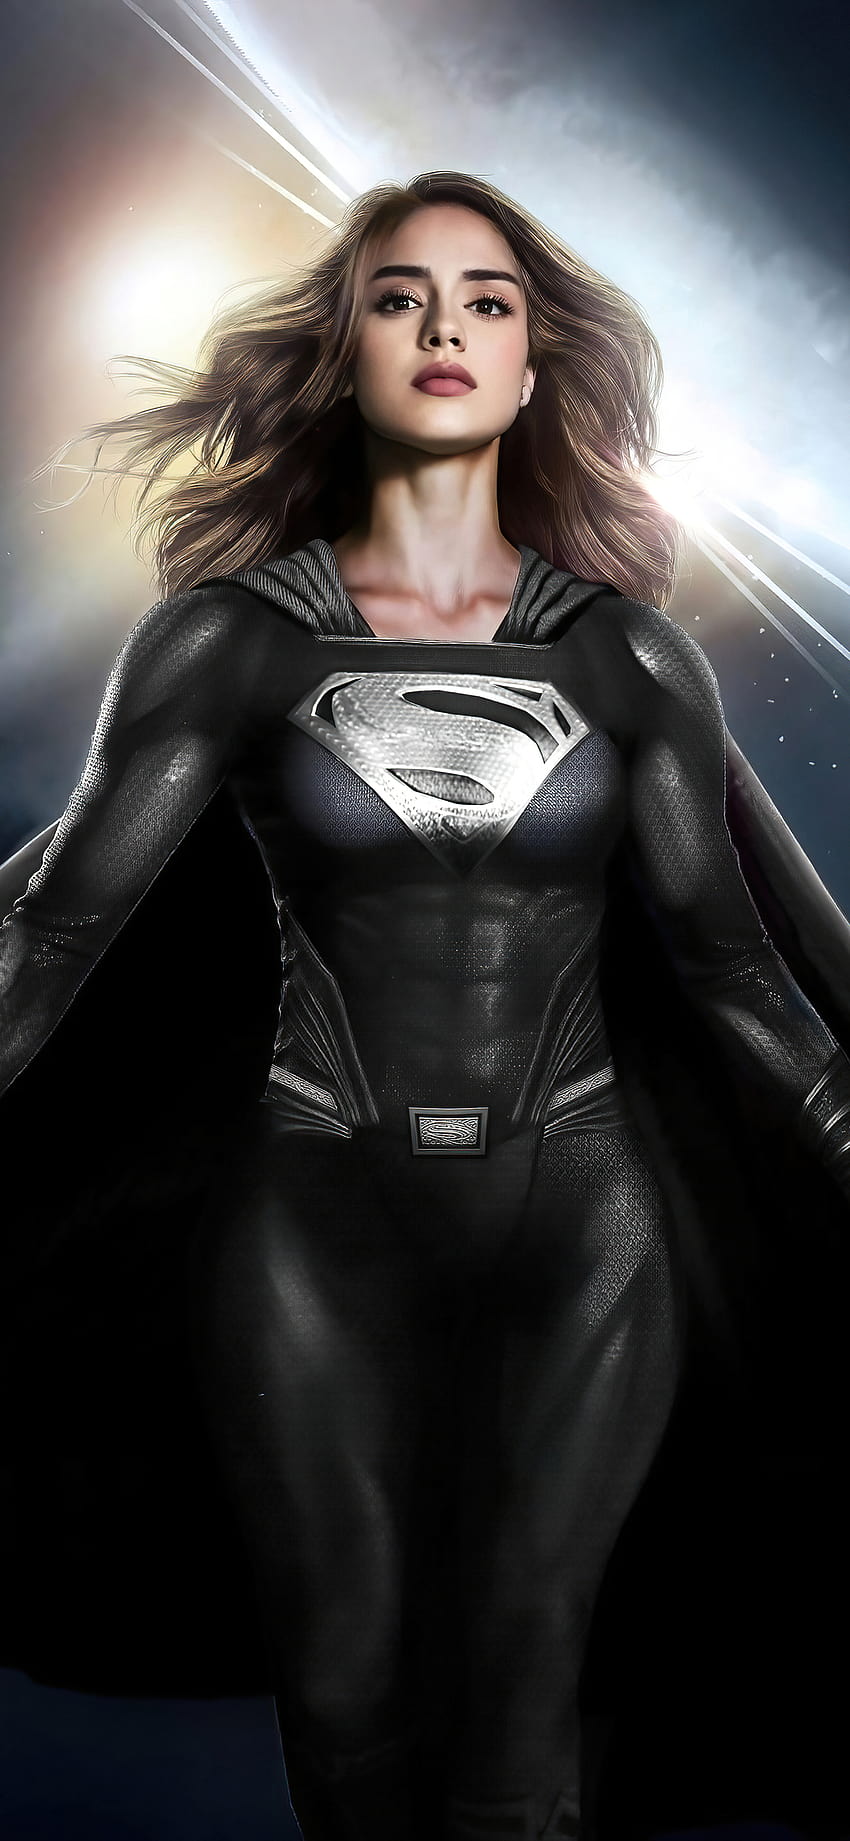 1125x2436 Sasha Calle Supergirl Fan Art Black Suit Iphone XS,Iphone 10,Iphone X , Backgrounds, and, supergirl suit HD phone wallpaper